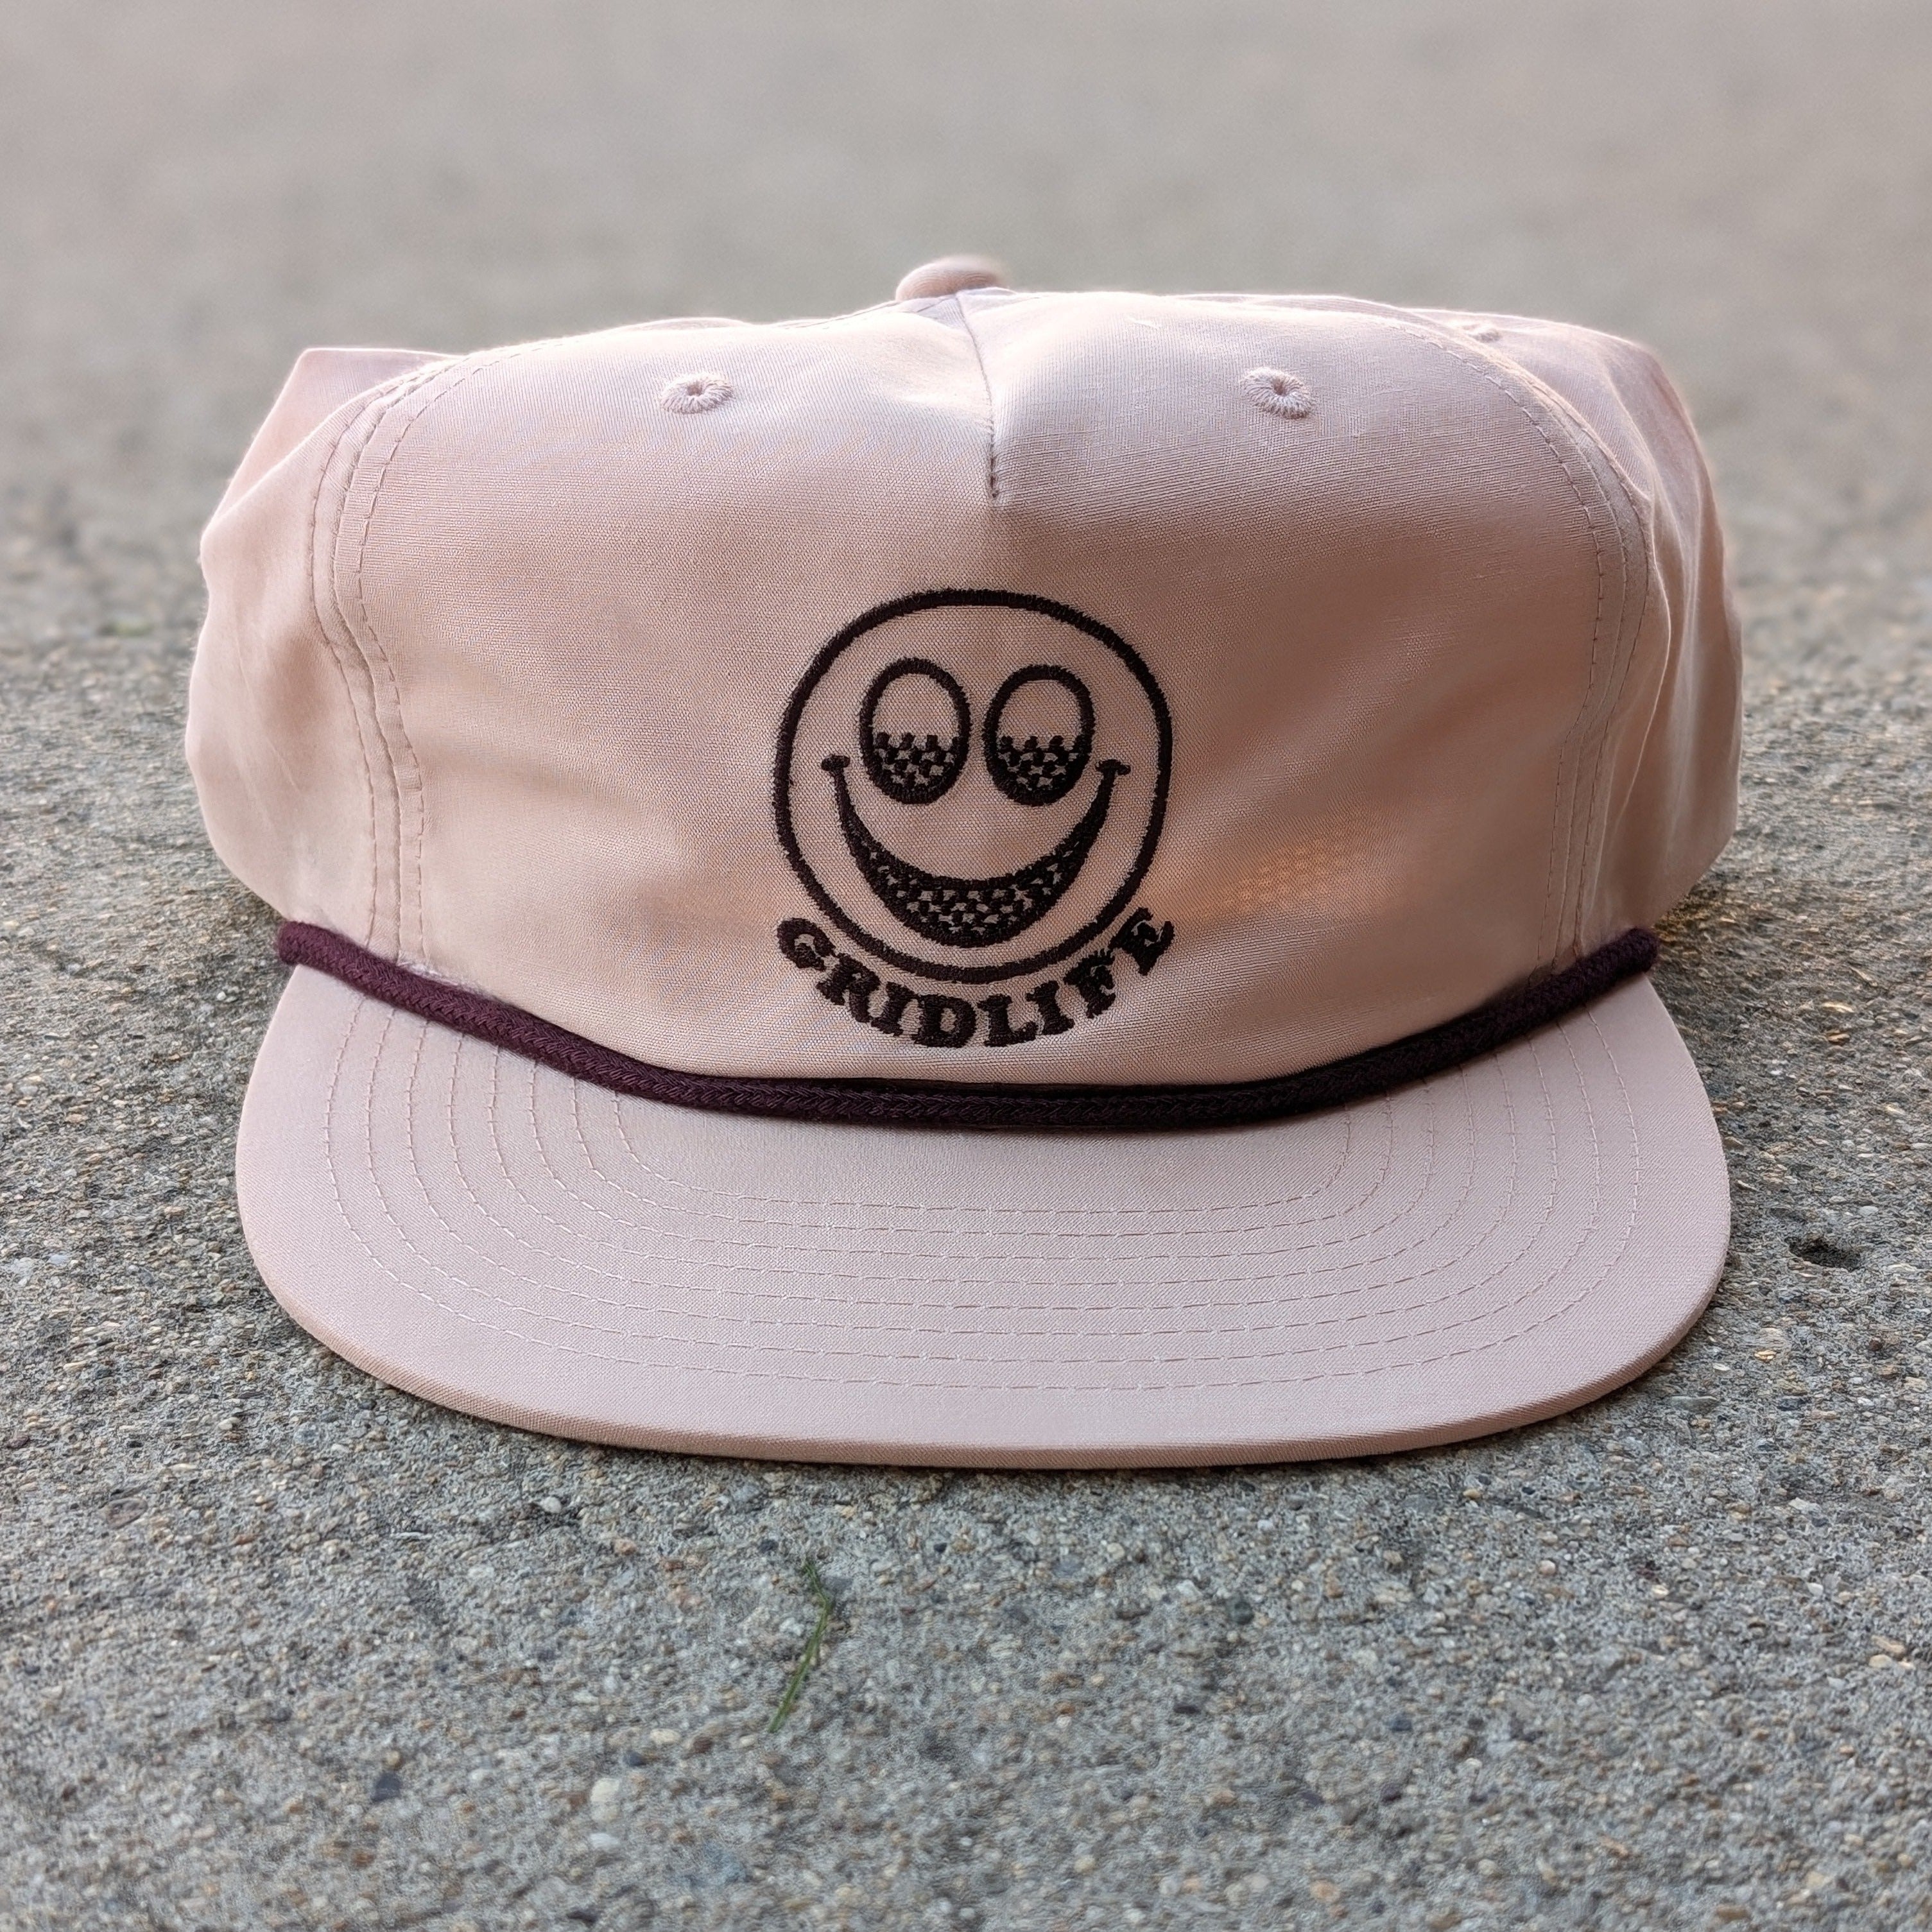 Adittional photo of GRIDLIFE Pink smiley hat 